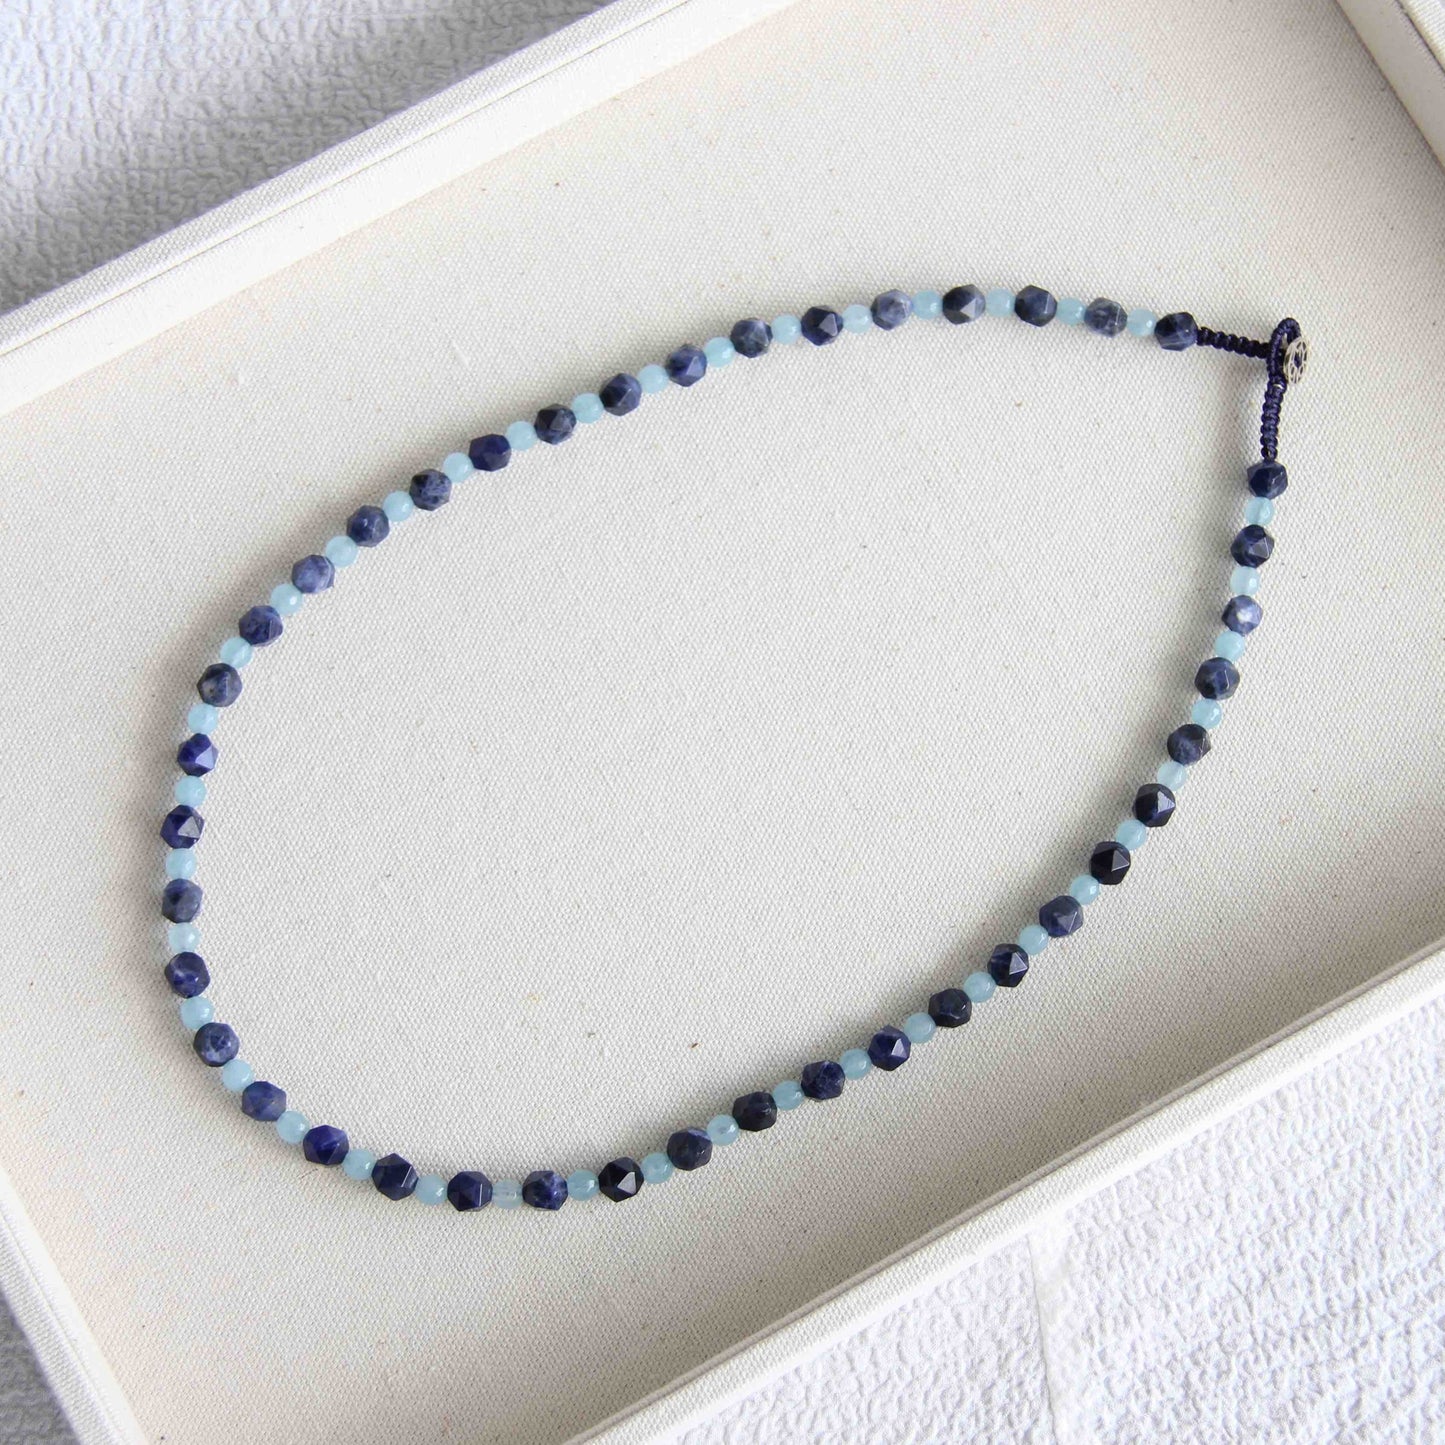 Sodalite and Blue Quartz Beaded Handmade Gemstone Necklace with 925 Sterling Silver Closure Button